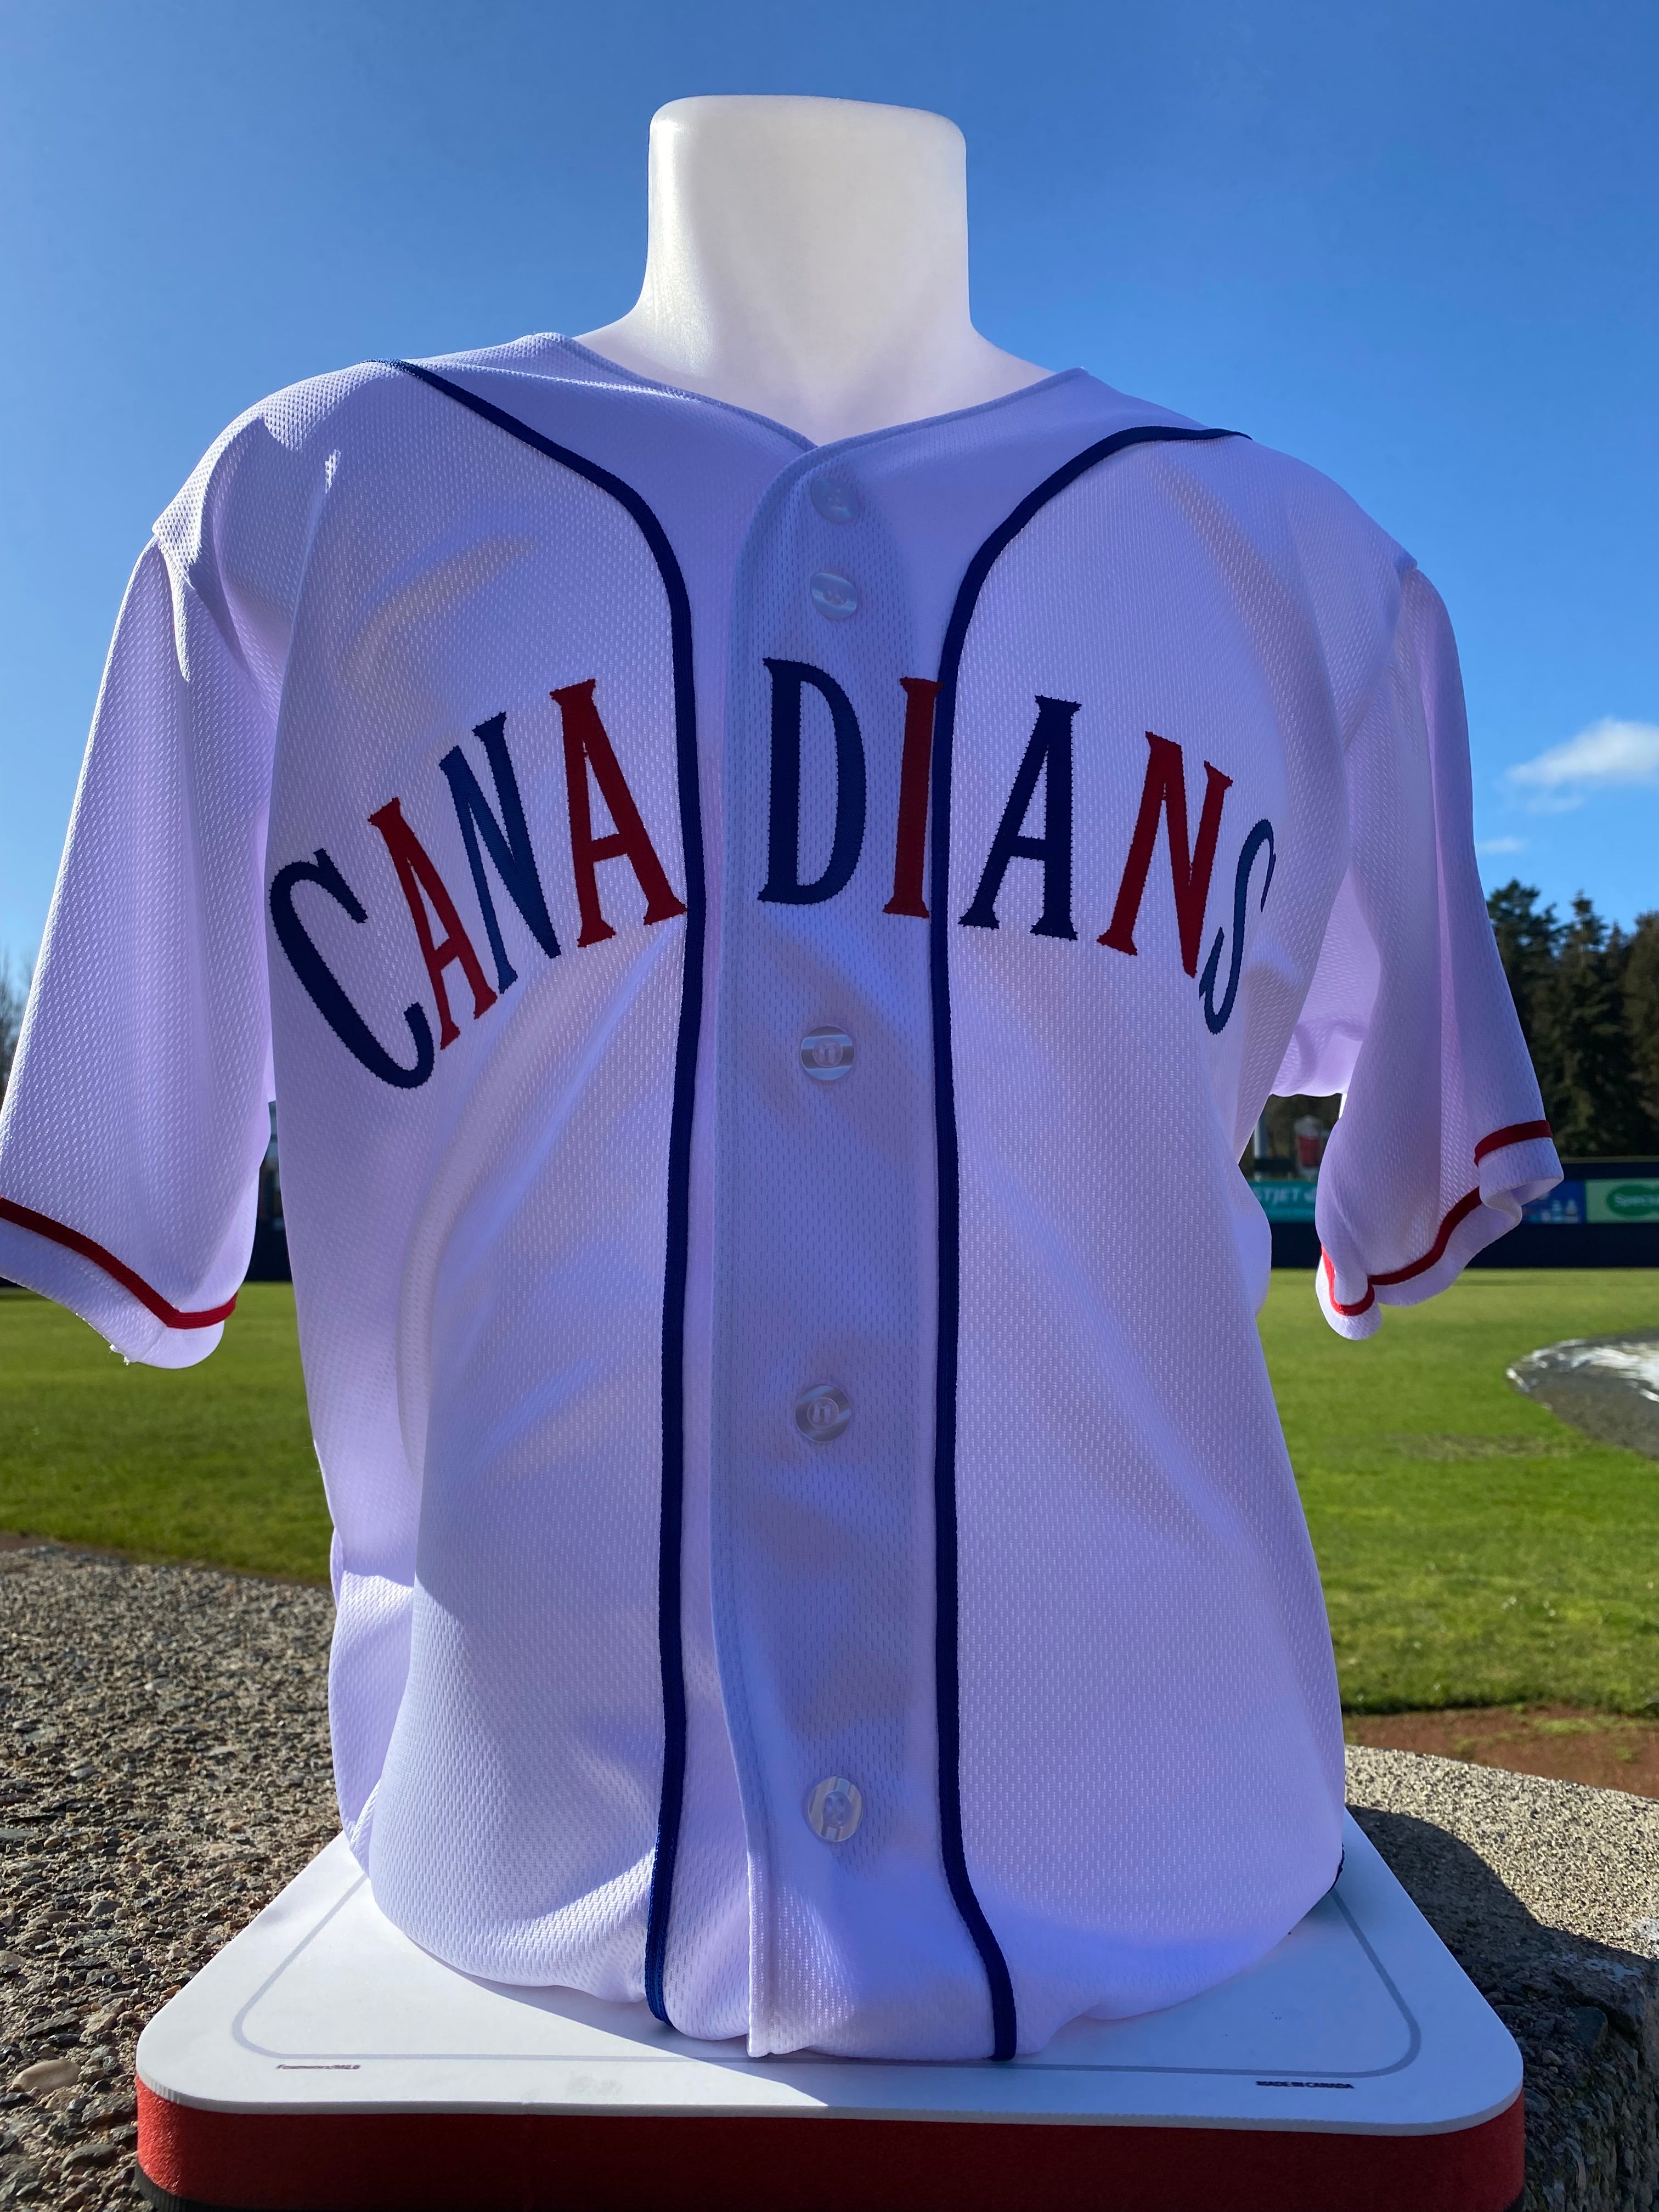 Vancouver Canadians Throwback Jersey